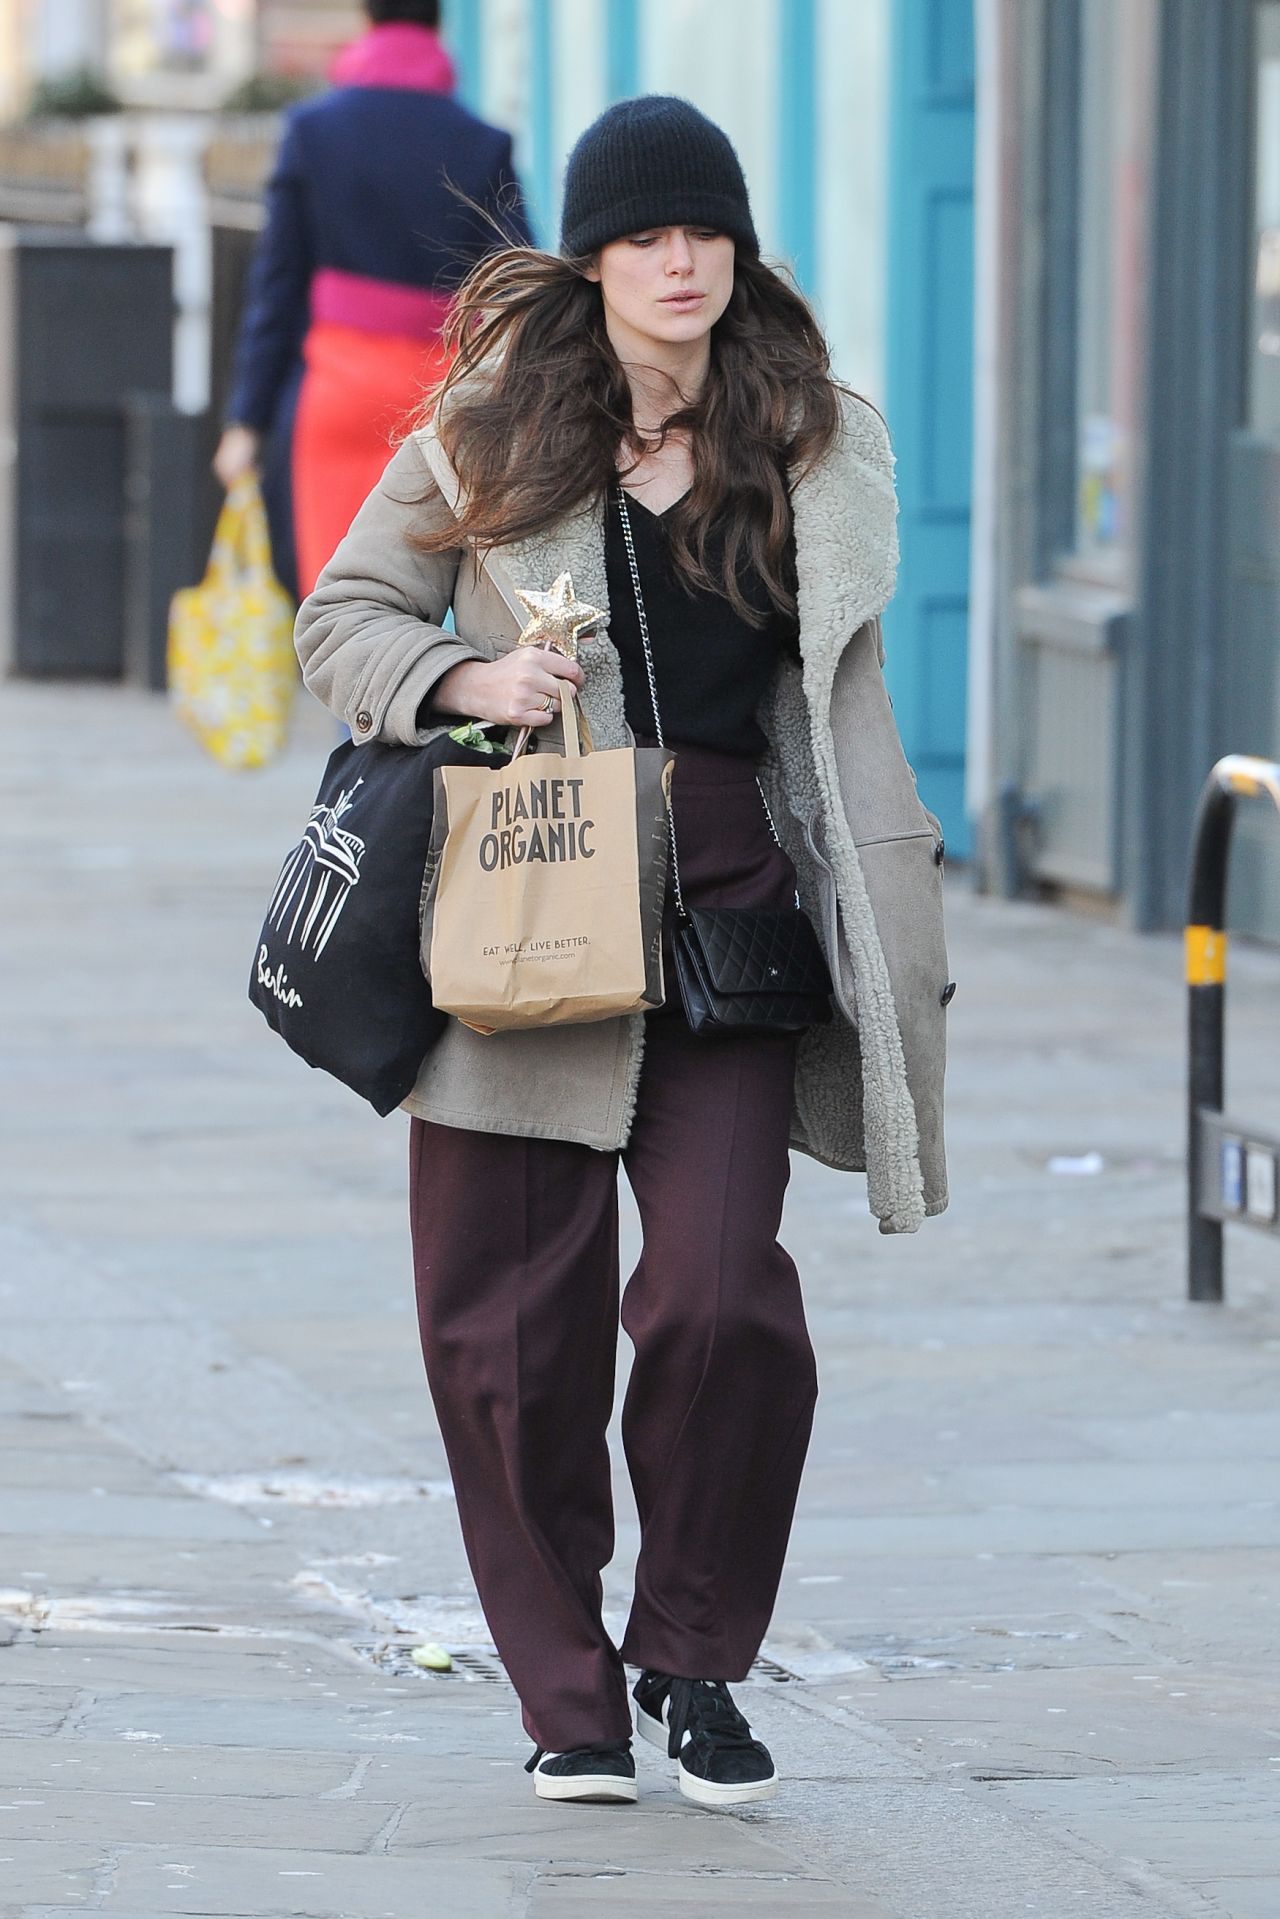 Keira Knightley in Casual Outfiit in North London, February 2018 ...